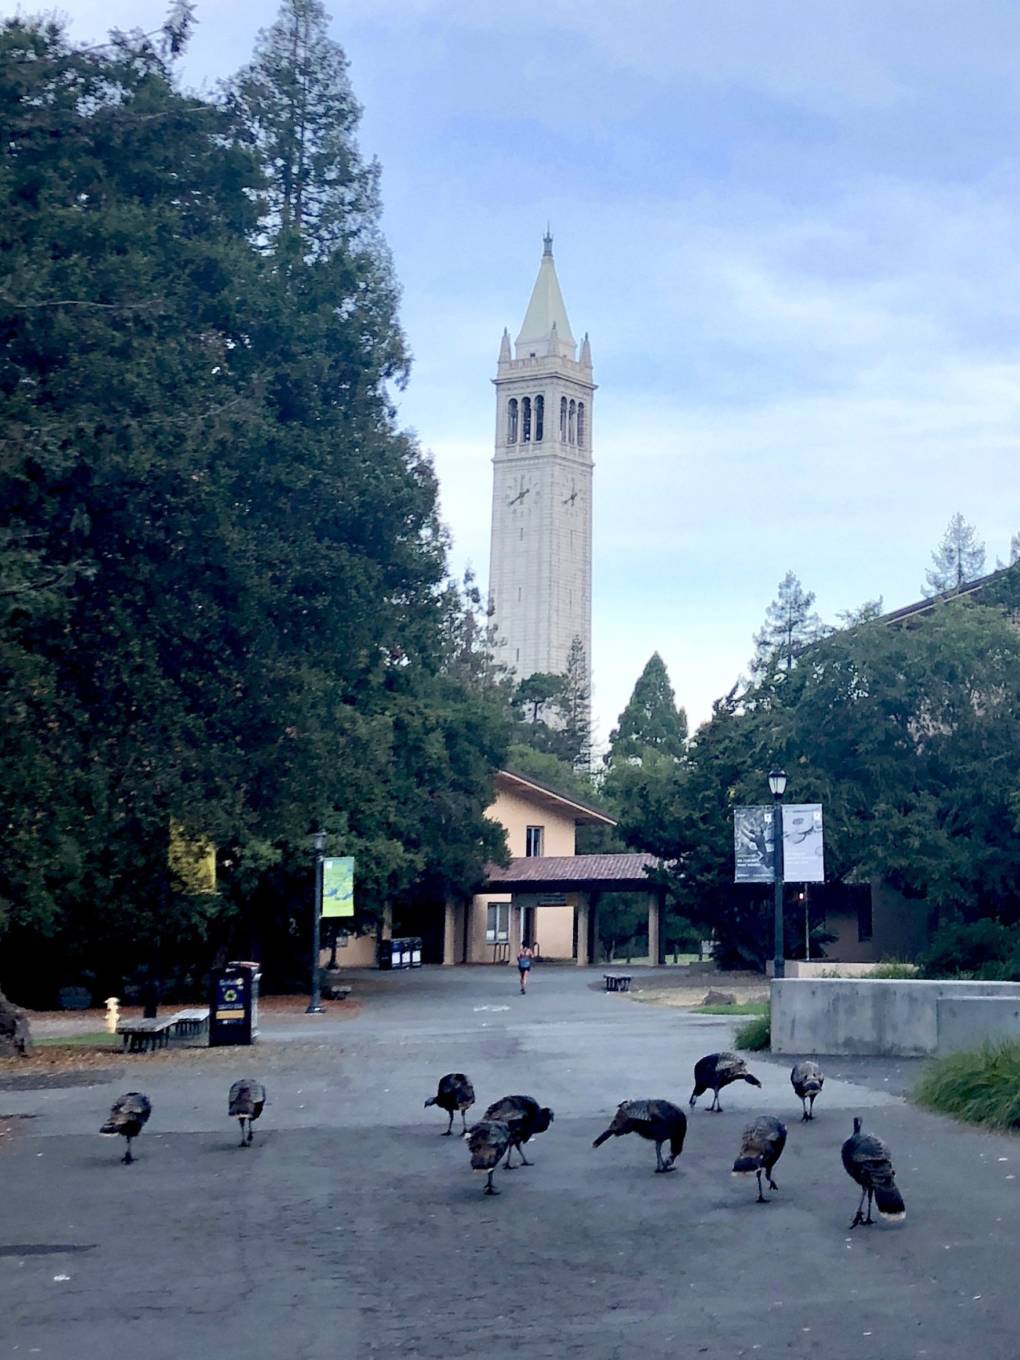 Wild Turkeys in front of the campanile at the University of California at Berkeley campus.